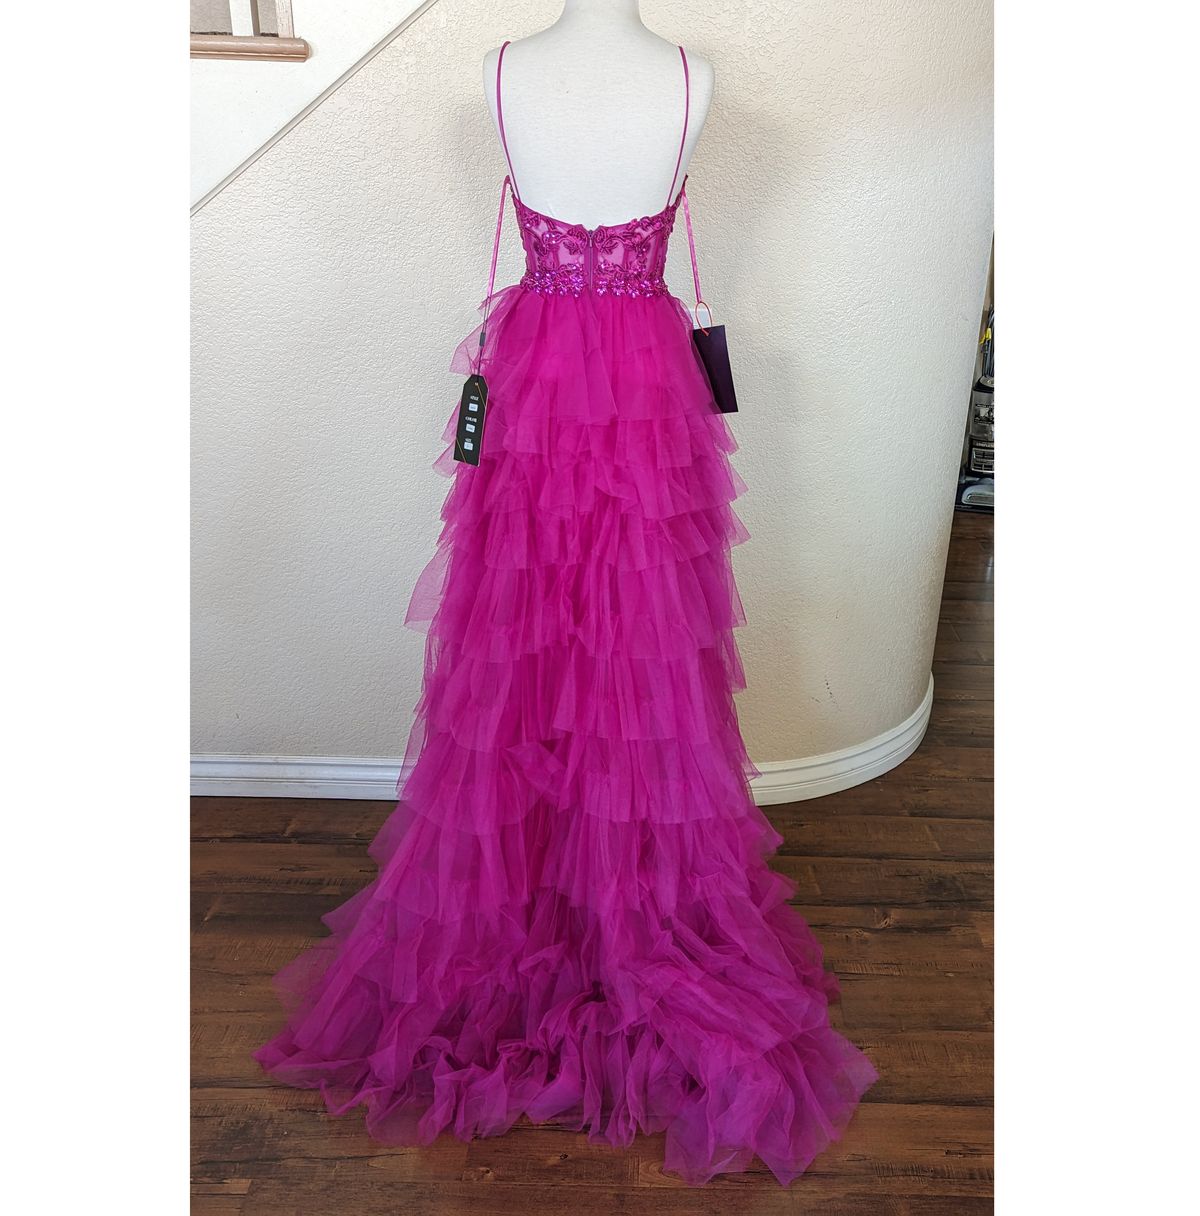 Style Fuchsia Sequin Corset Tulle Prom Ball Gown Dress Size 0 Prom Plunge Lace Pink Ball Gown on Queenly